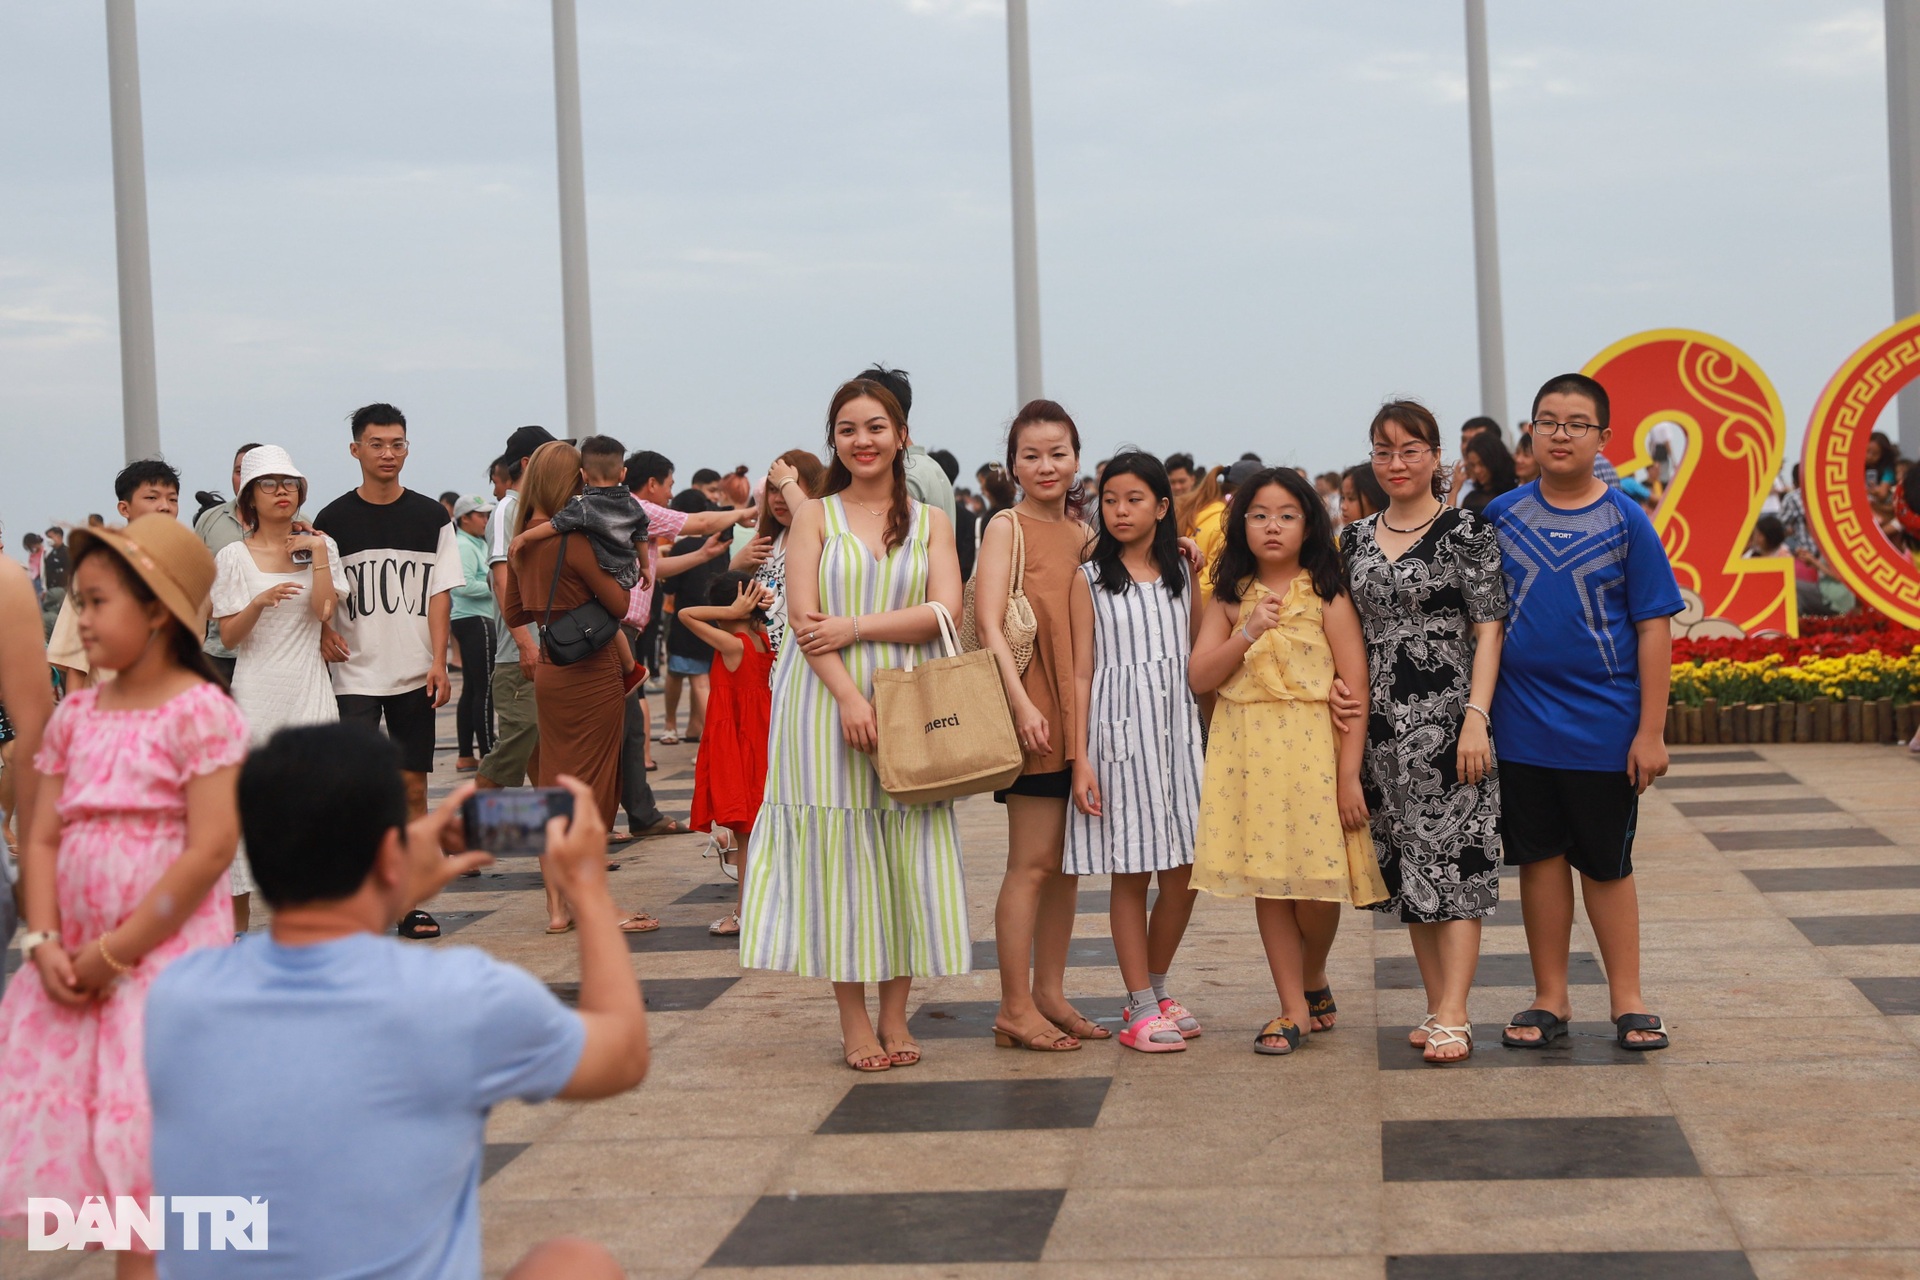 People flock to the beach in the Tau region on the 4th of Tet - 2